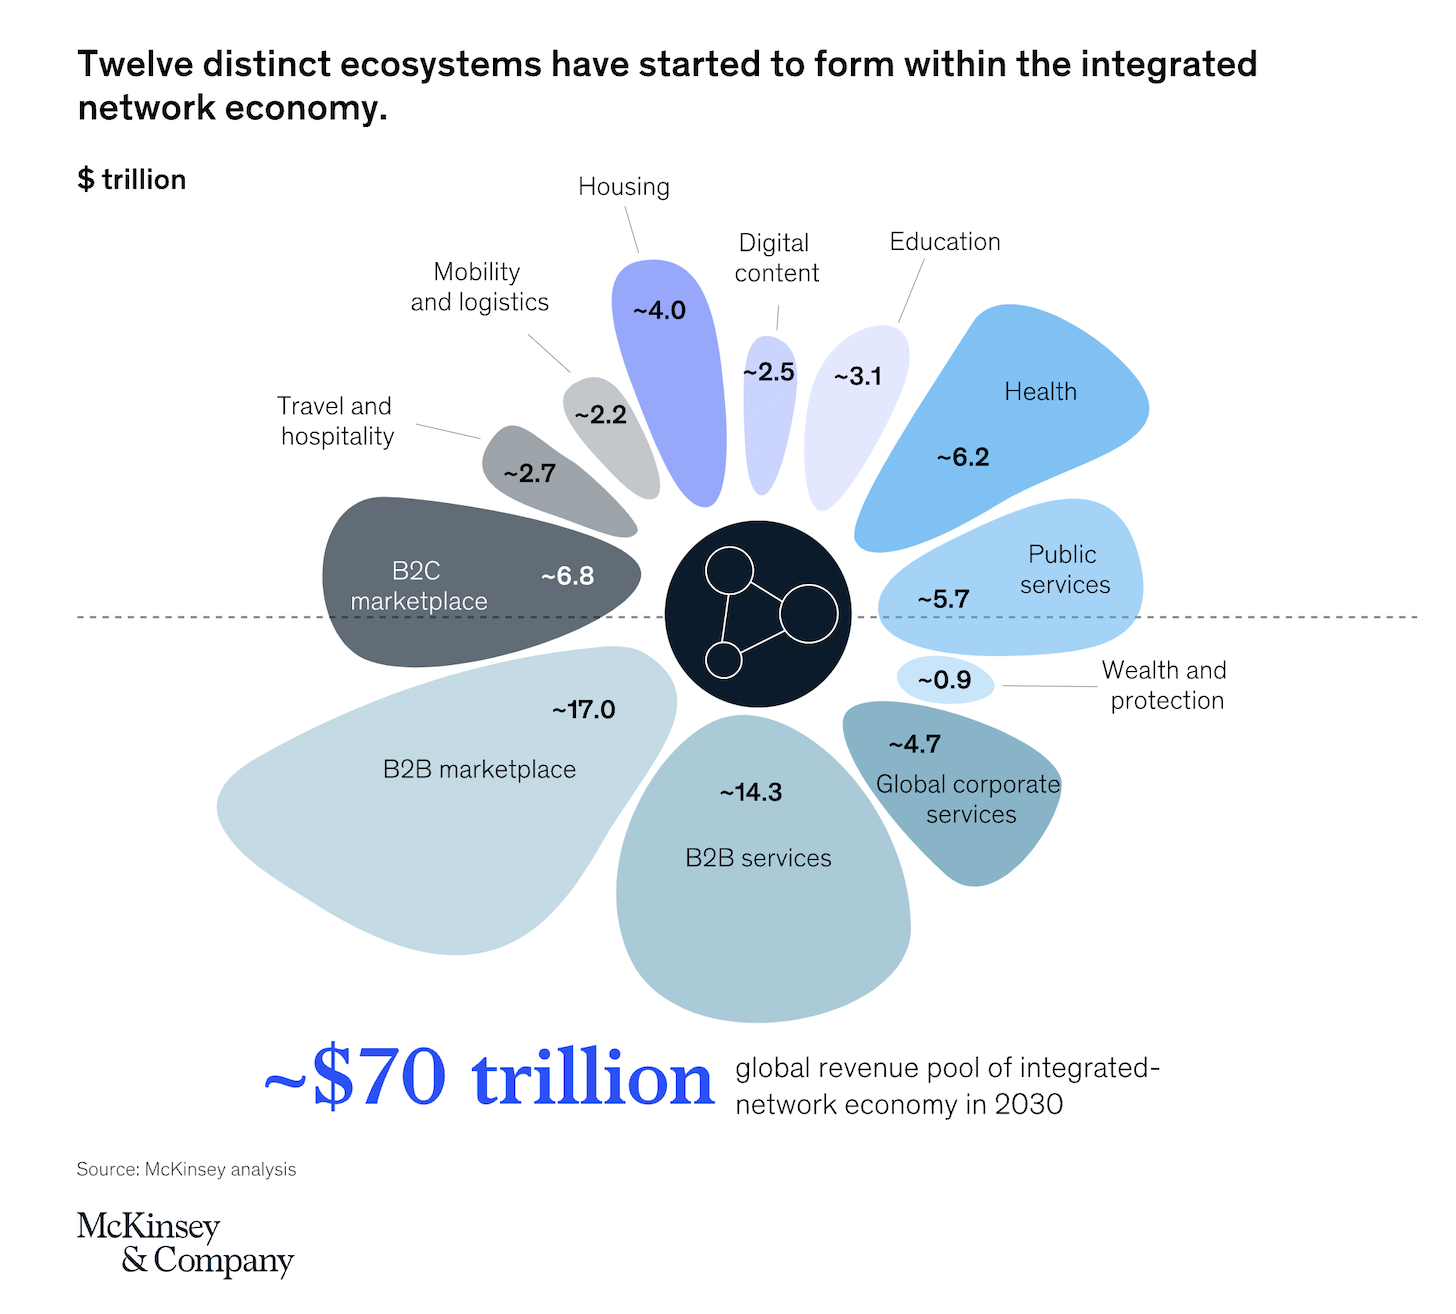 $70 Trillion Ecosystems in the Global Integrated Network Economy (McKinsey)